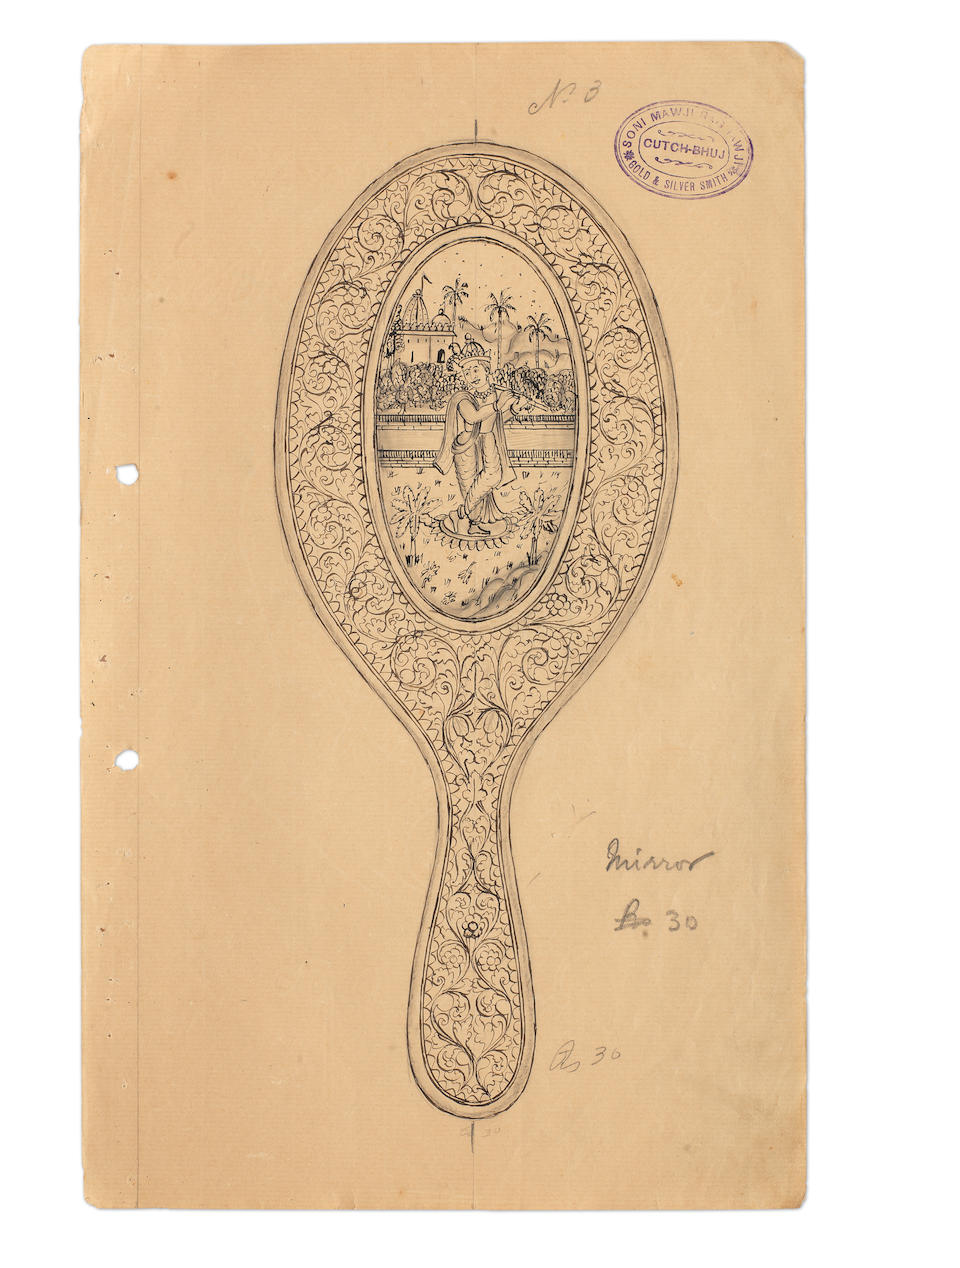 A group of designs and sketches by the workshop of Raghavji Mawji Bhuj, late 19th Century